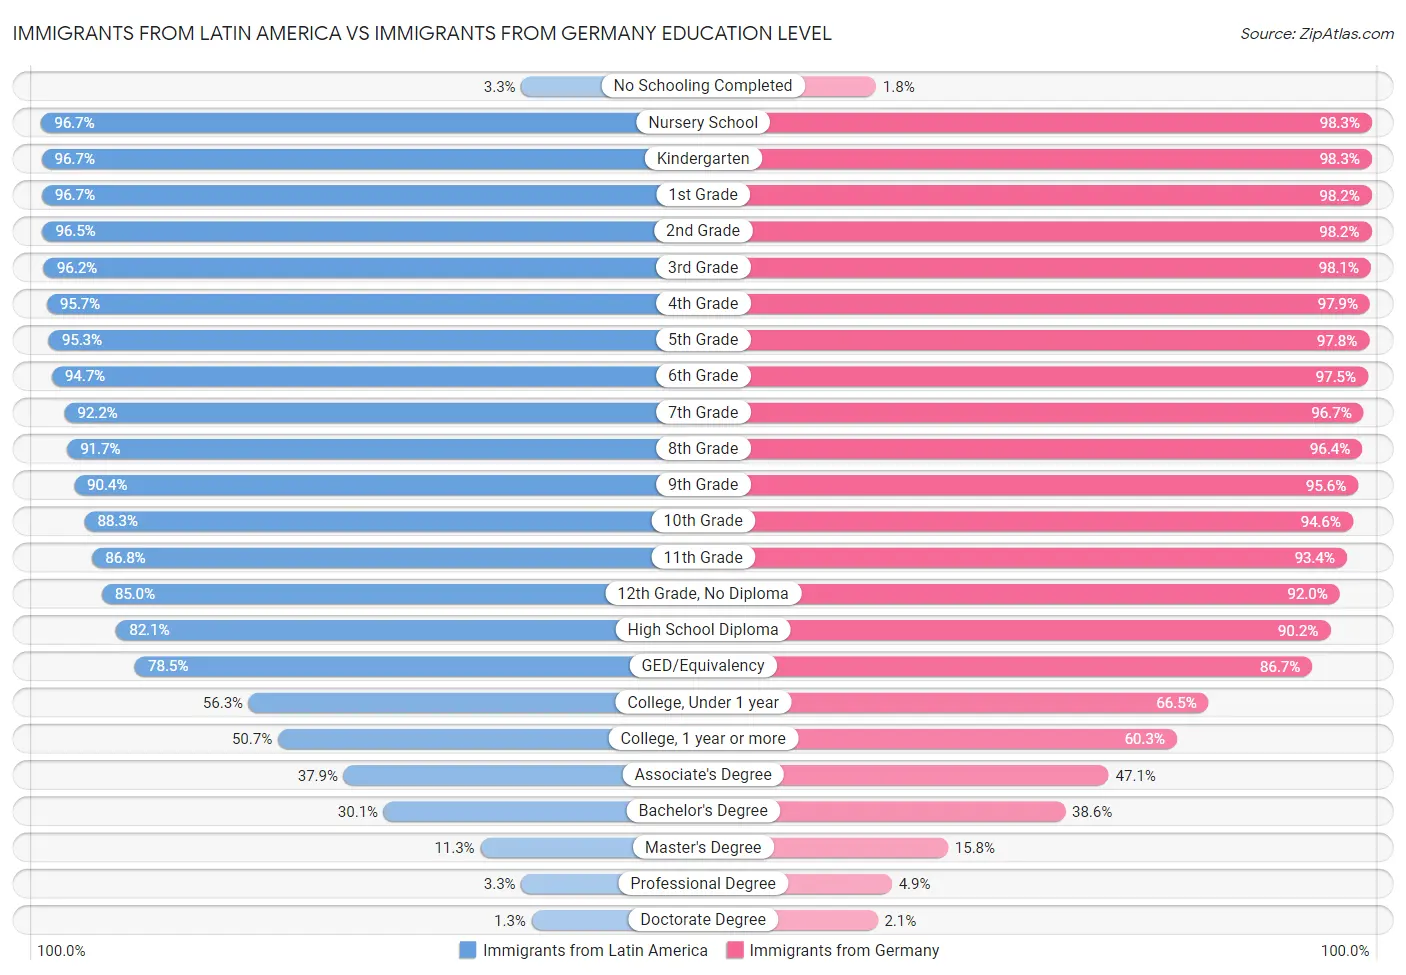 Immigrants from Latin America vs Immigrants from Germany Education Level